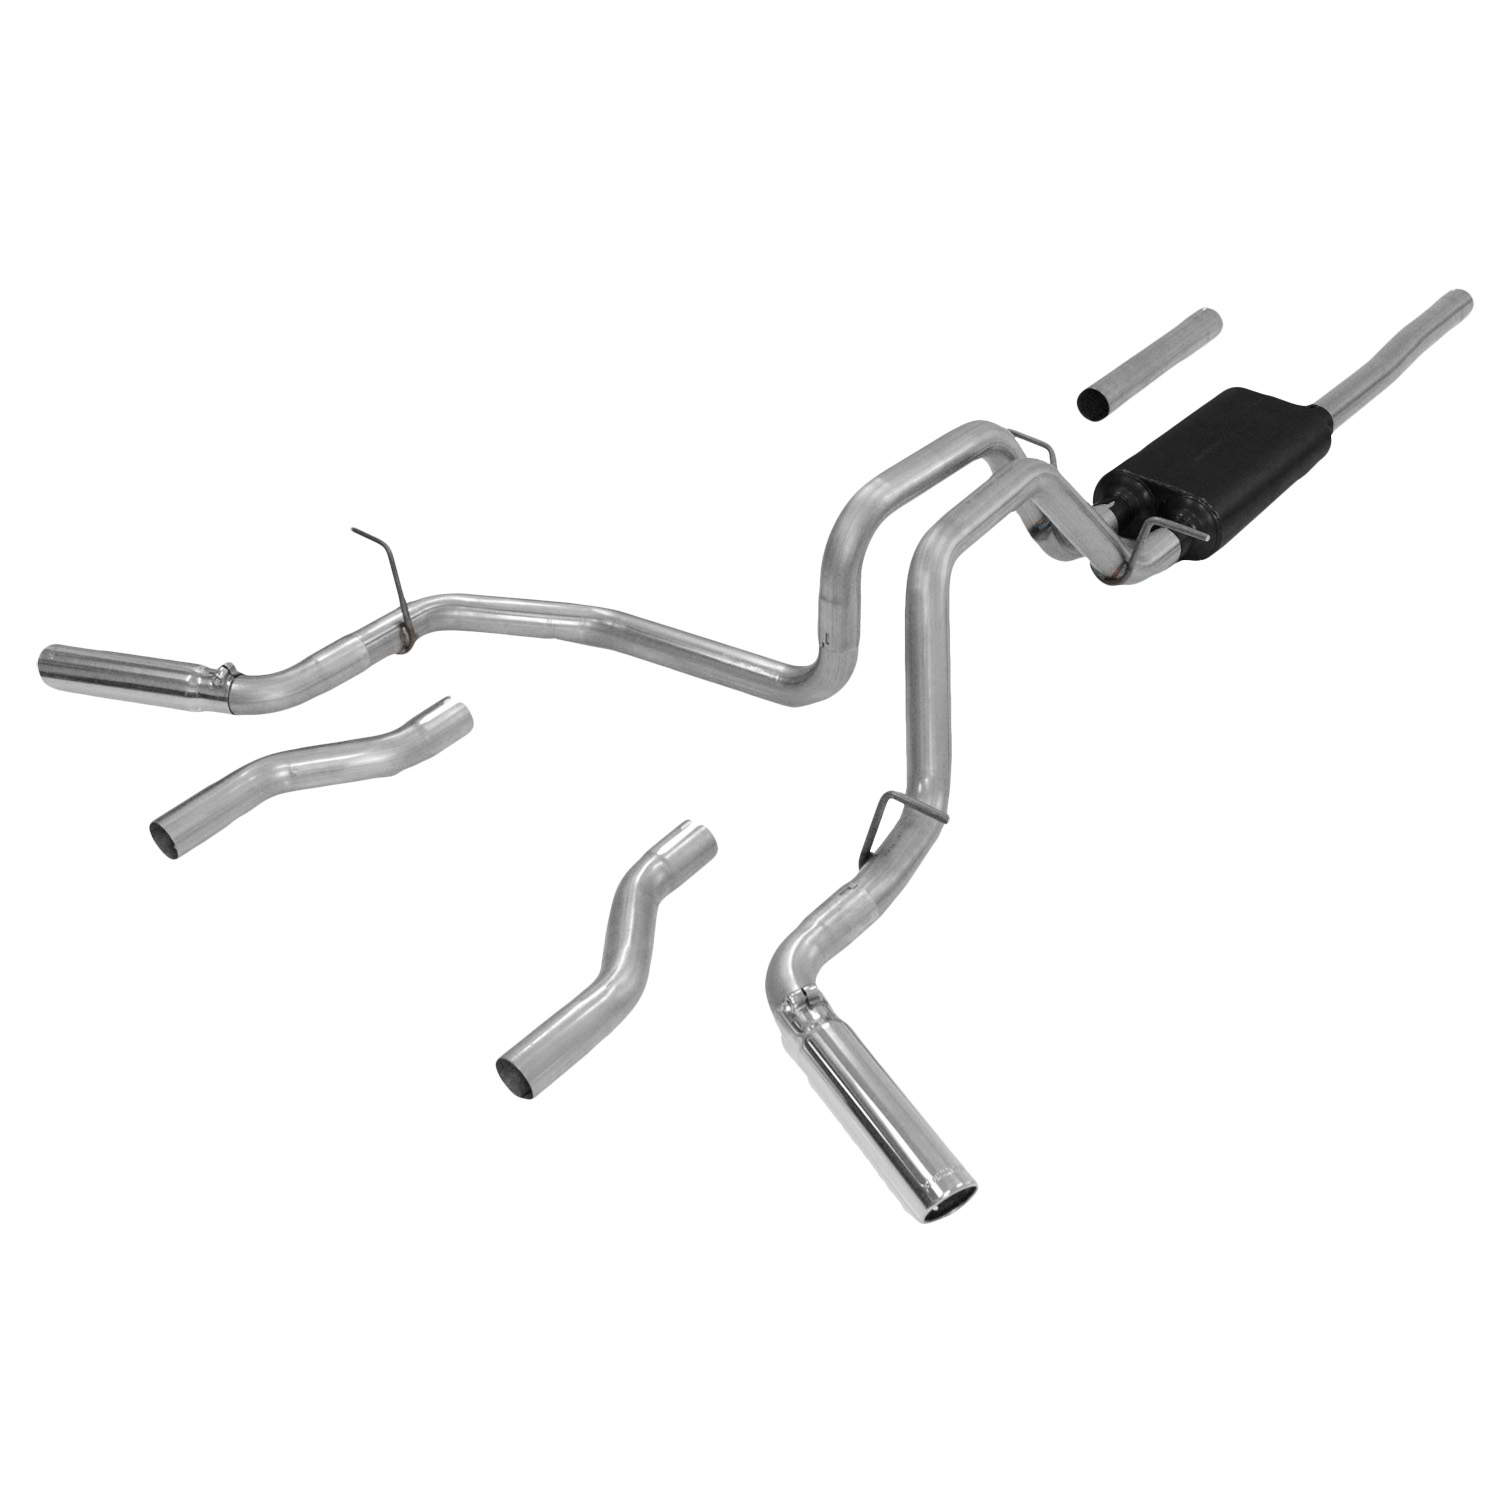 2007-2013 Chevy/GMC 1500 Flowmaster 409S Force II Catback Exhaust w/Dual-Rear Side Exit  - Ext. Cab/Std. Box & Crew Cab/Short Be